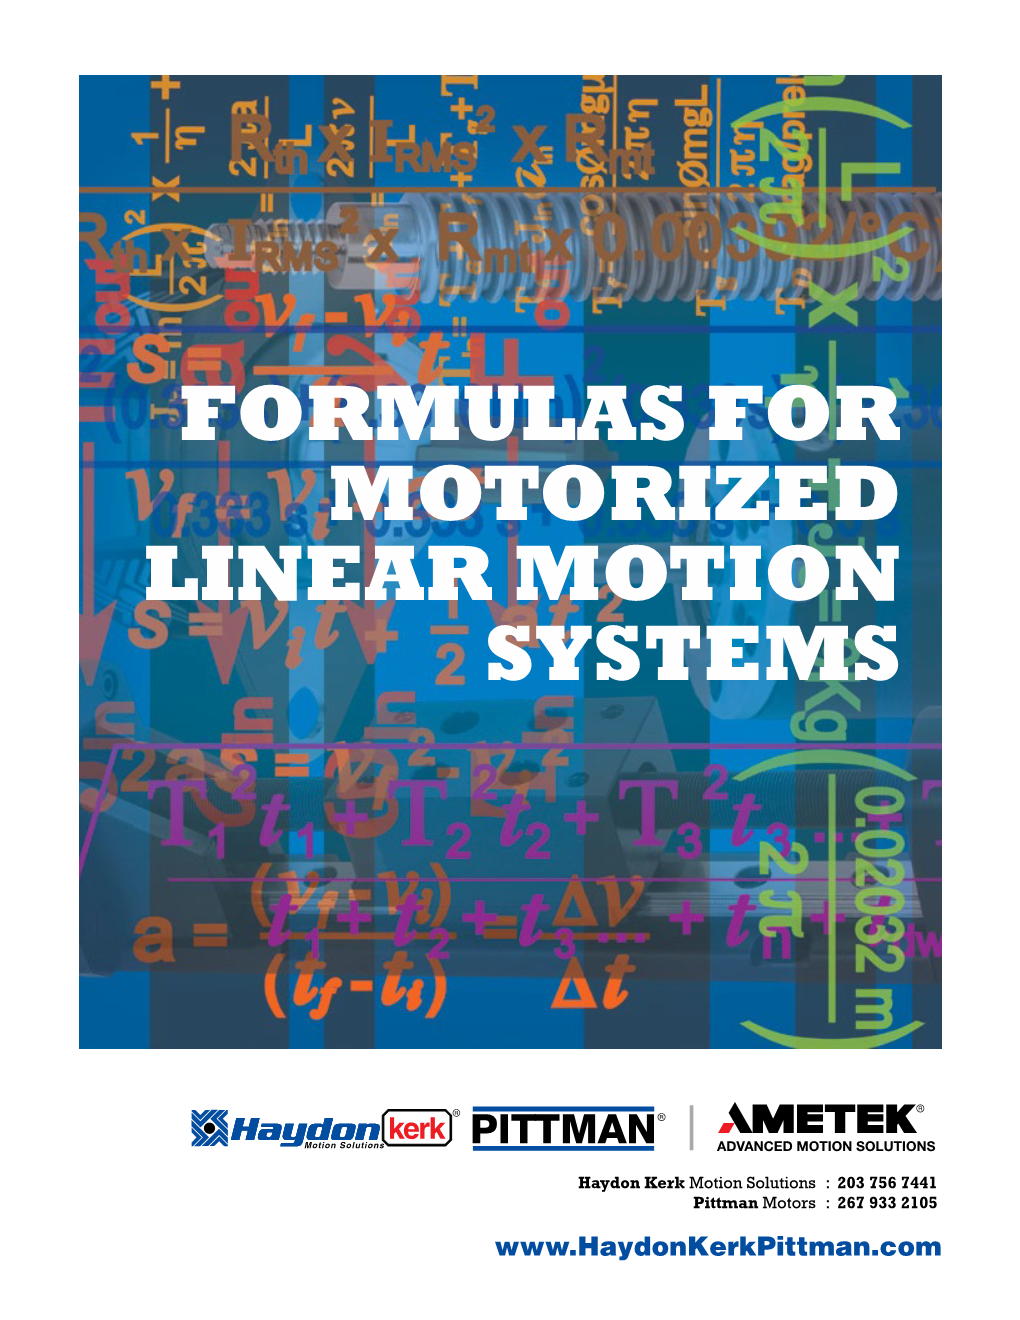 Formulas for Motorized Linear Motion Systems